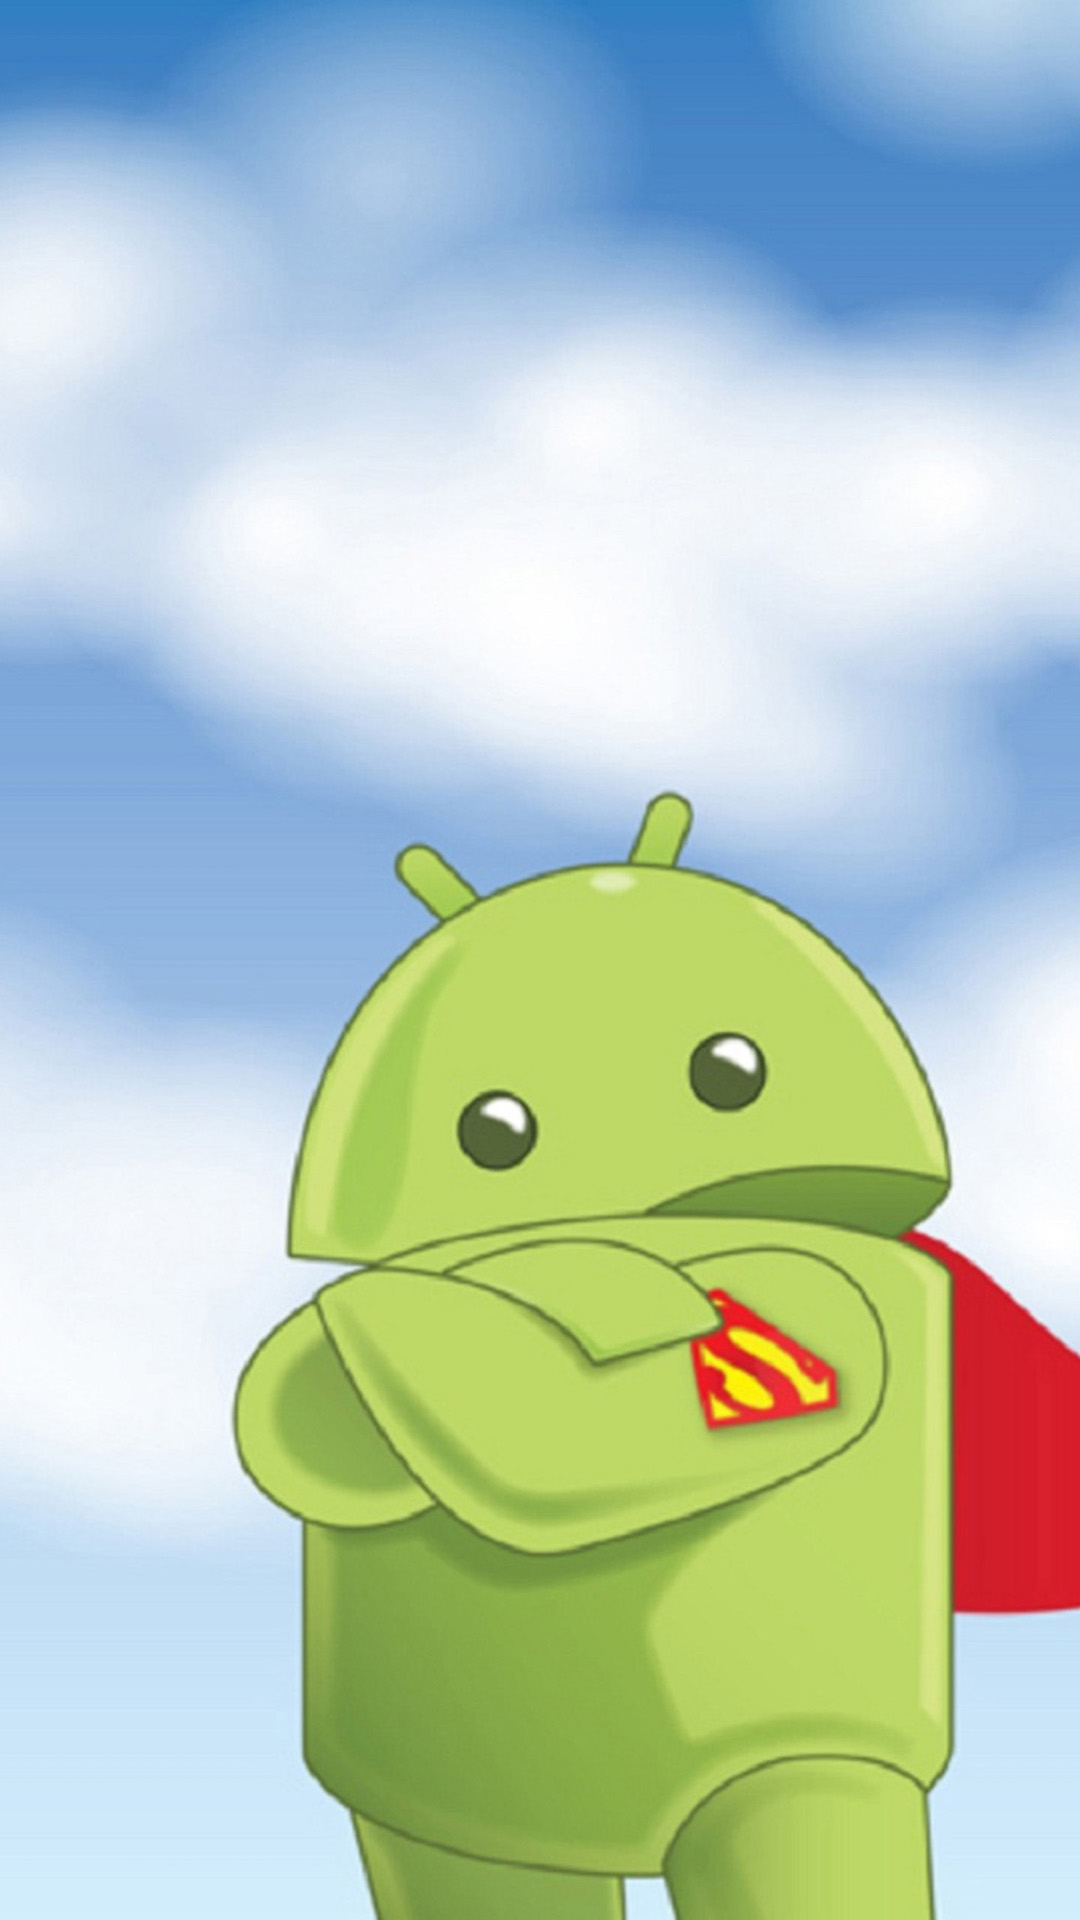 super hd wallpapers for android,green,cartoon,illustration,sky,animation